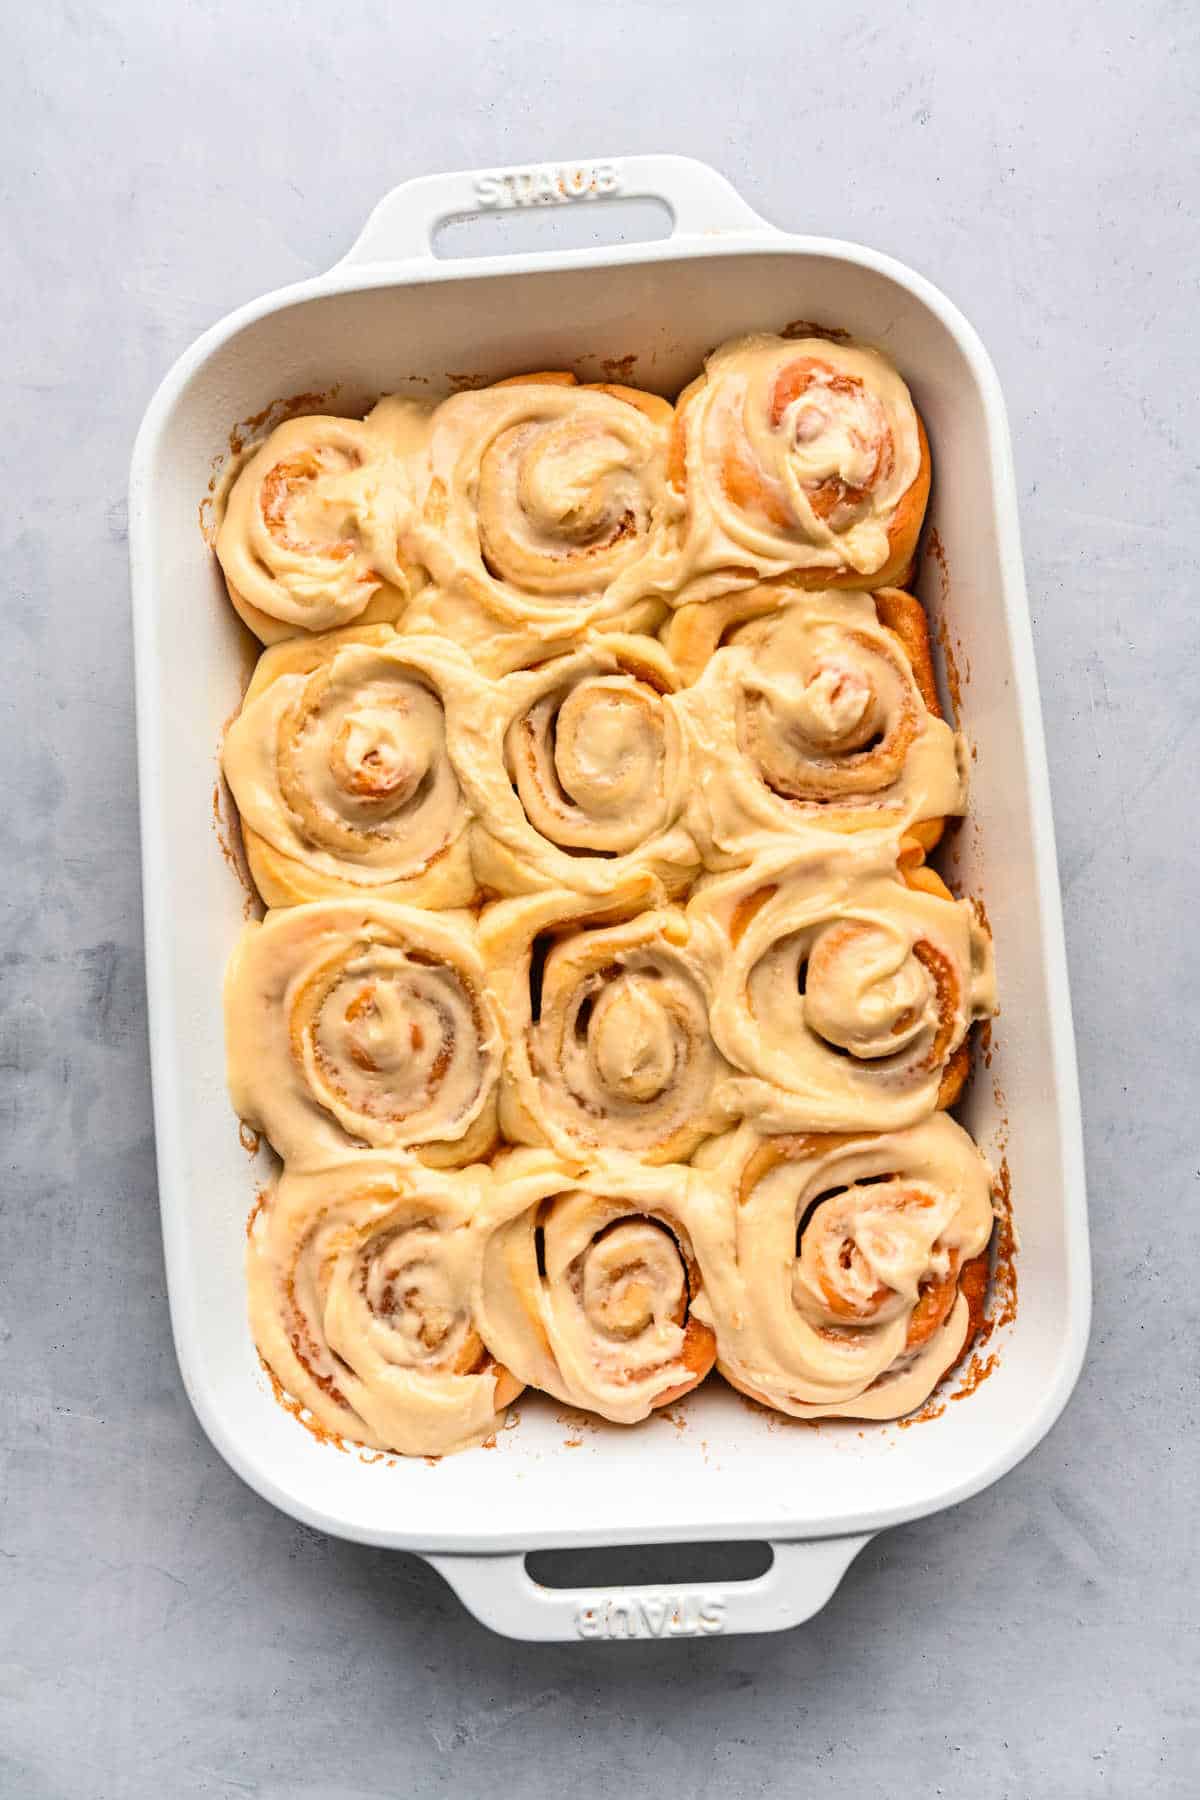 Maple frosted cinnamon rolls in a white baking pan.